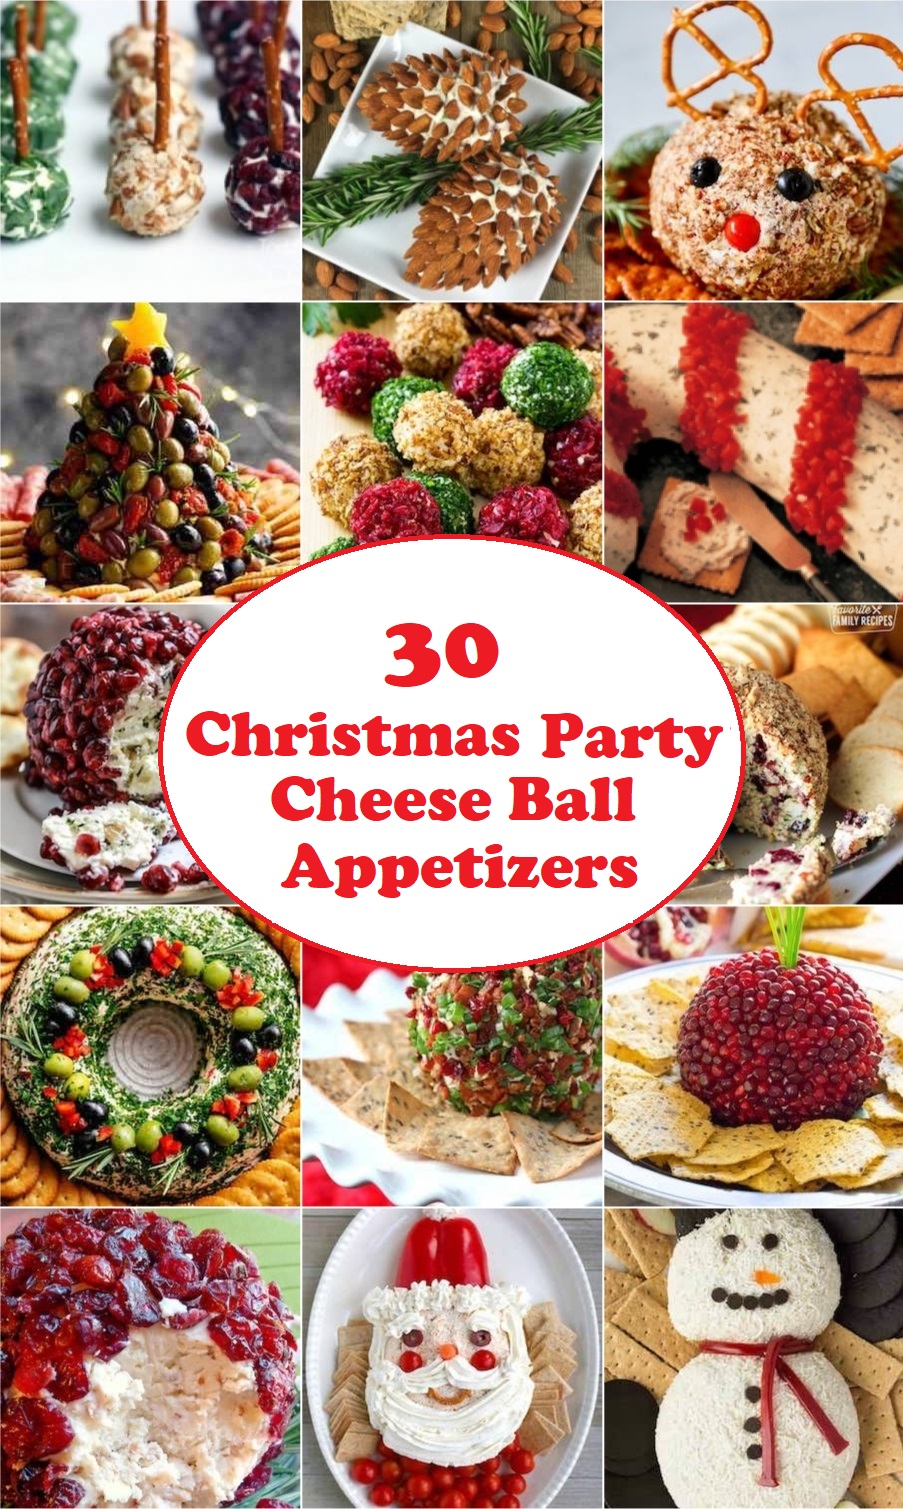 30 Christmas Party Cheese Ball Appetizers